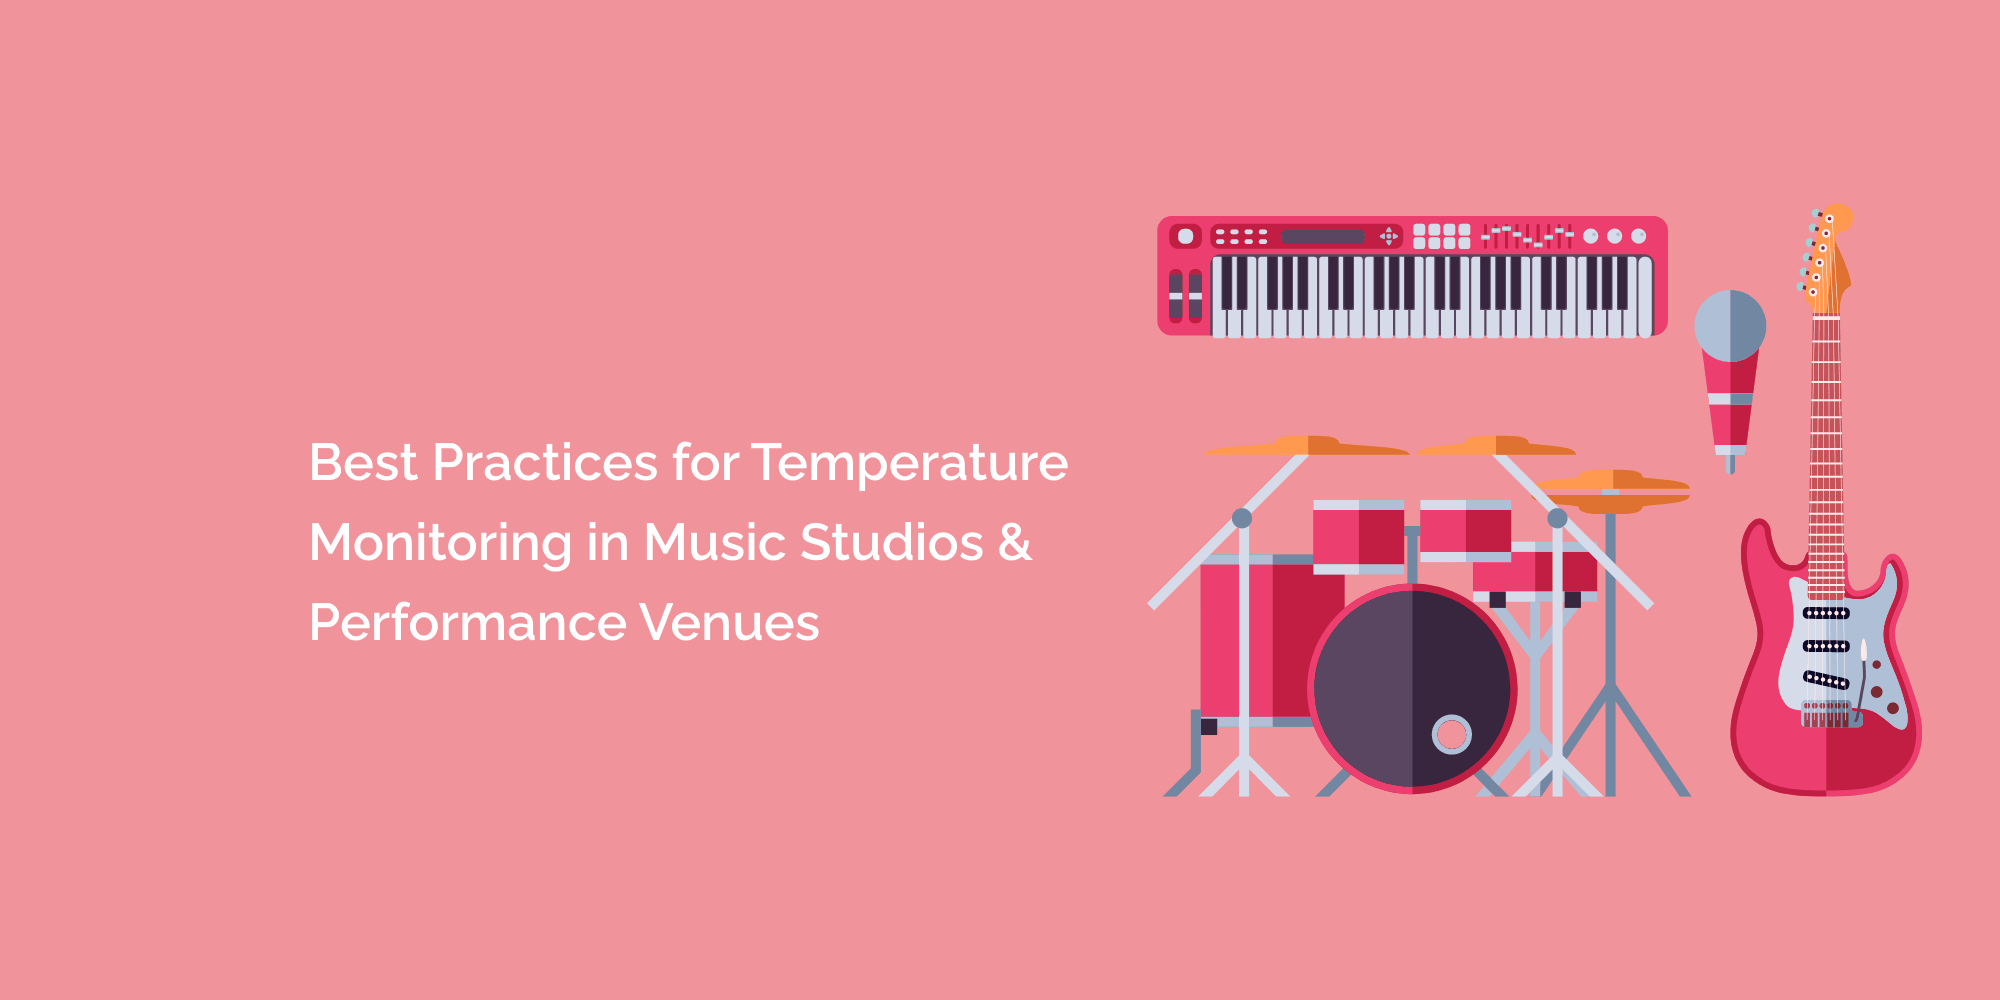 Best Practices for Temperature Monitoring in Music Studios and Performance Venues